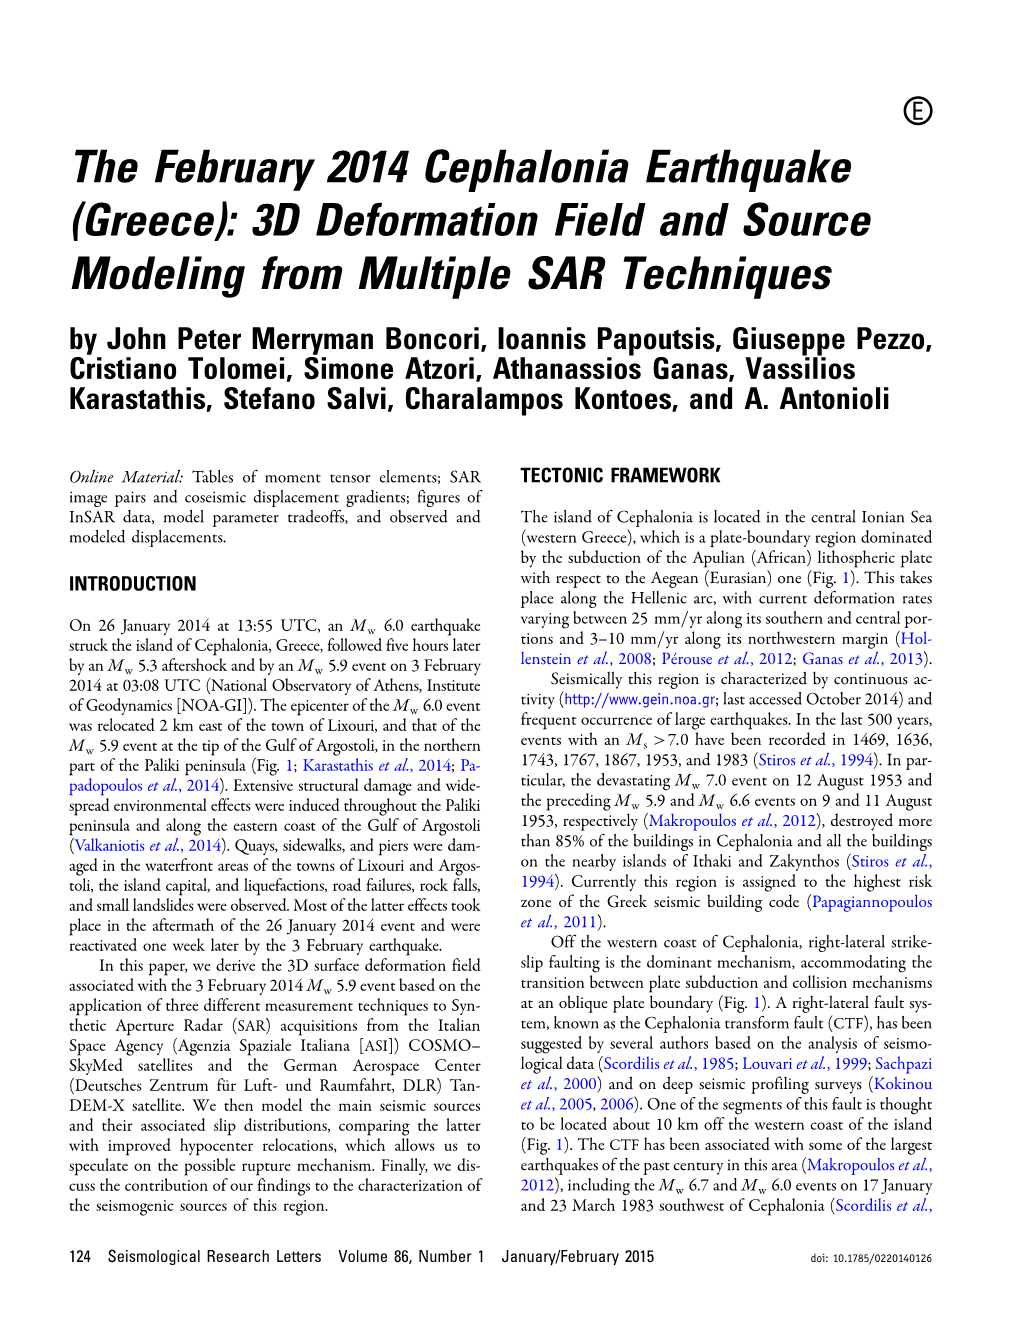 The February 2014 Cephalonia Earthquake (Greece): 3D Deformation Field and Source Modeling from Multiple SAR Techniques